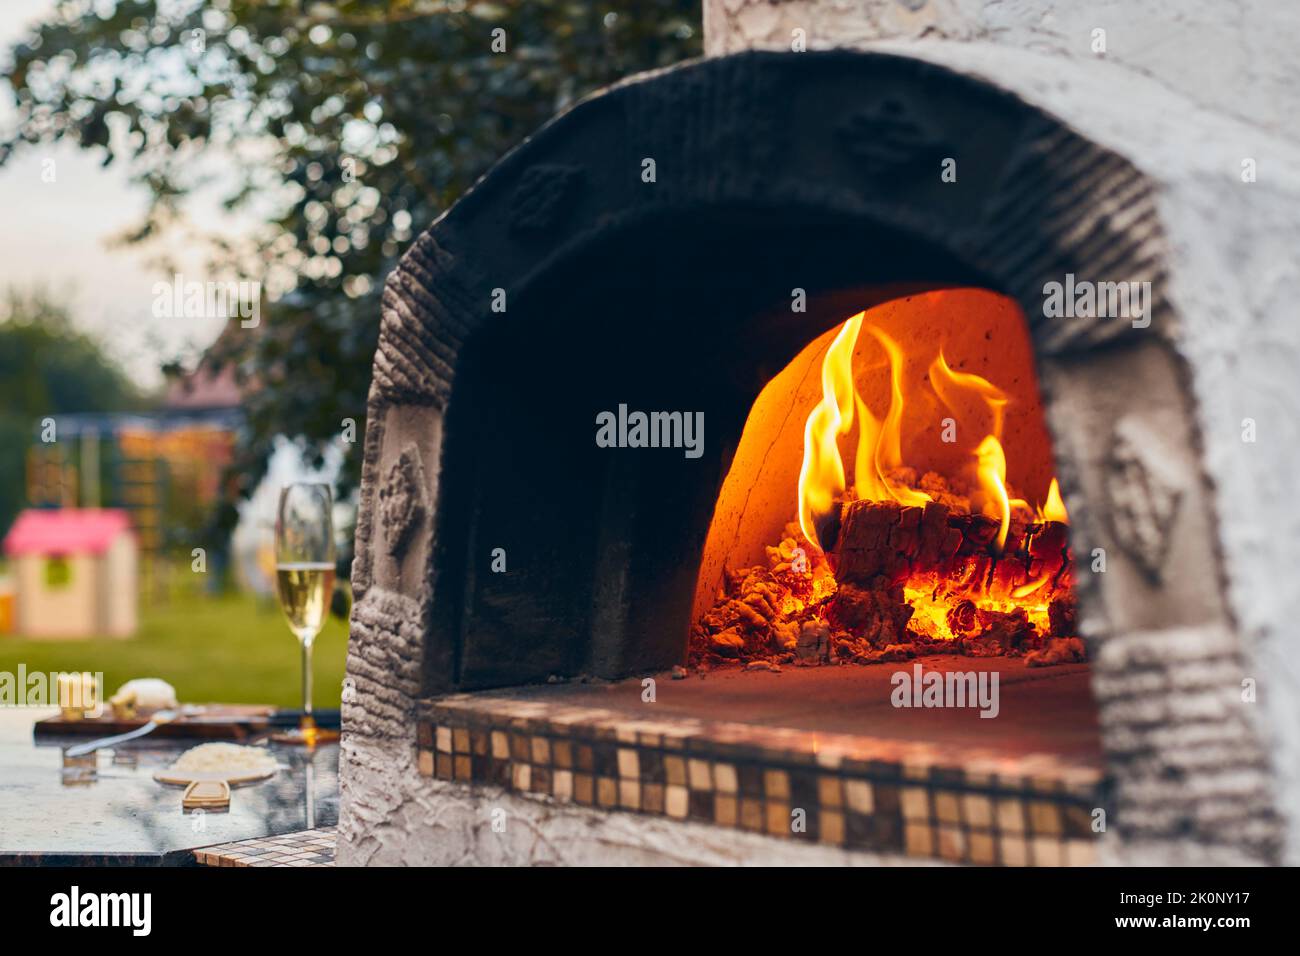 Wood-fired pizza oven with birch logs for kindling. The fire burns and the oven heats up. Front view. Stock Photo